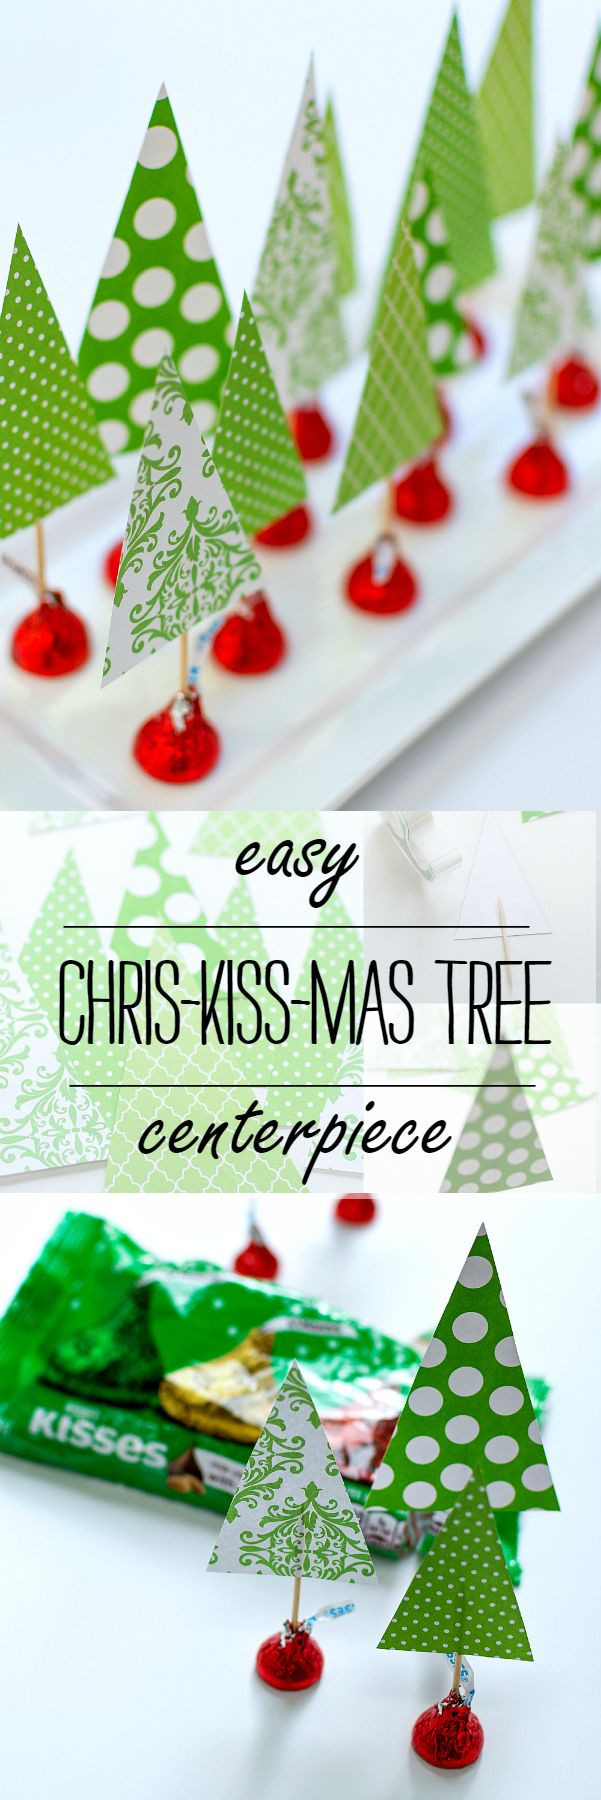 Homemade Christmas Party Favors Ideas
 15 best ideas about Holiday Centerpieces on Pinterest